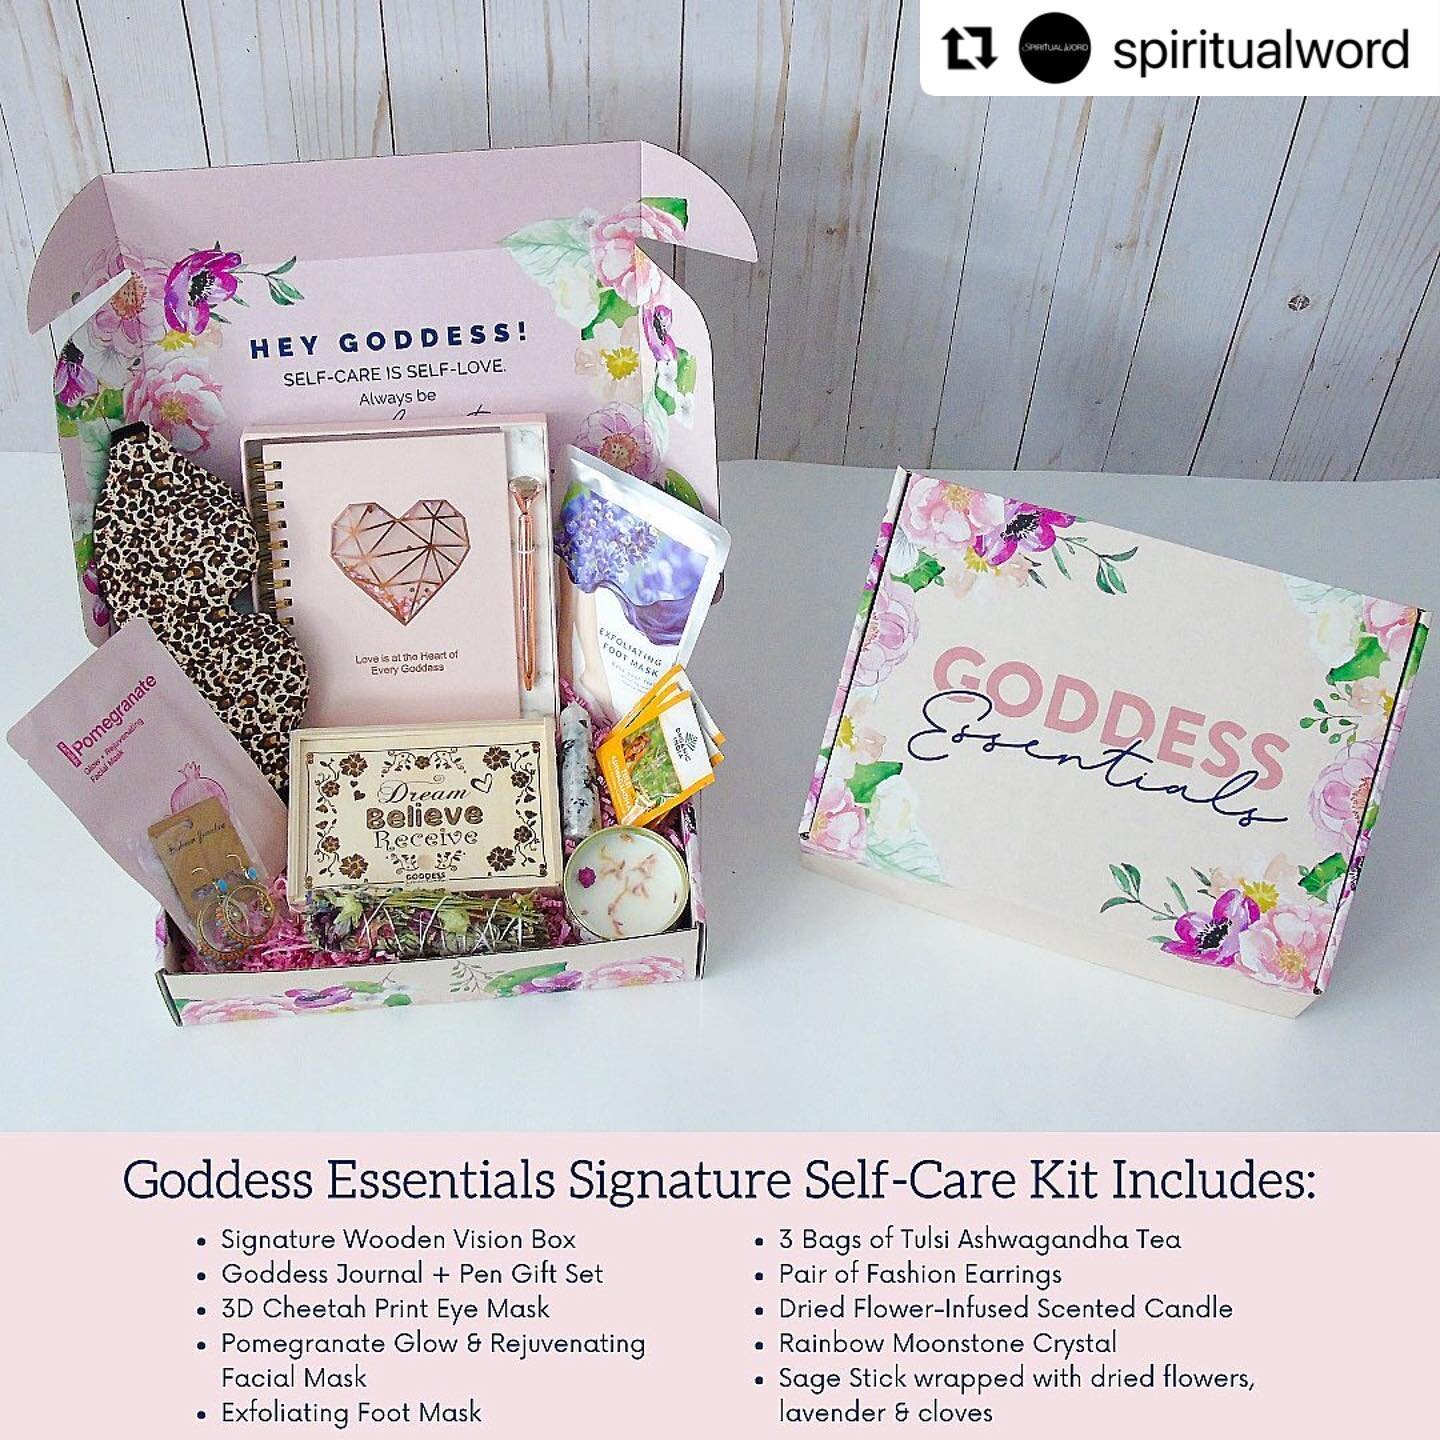 Thank you @spiritualword 🥰💕 #Repost @spiritualword with @make_repost
・・・
#GoddessEssentialsPartner Ladies self-care is a necessity! 💁🏽&zwj;♀️ @goddessessentials.love has all the self-care goodies to enhance your faith, wellness &amp; beauty! And 